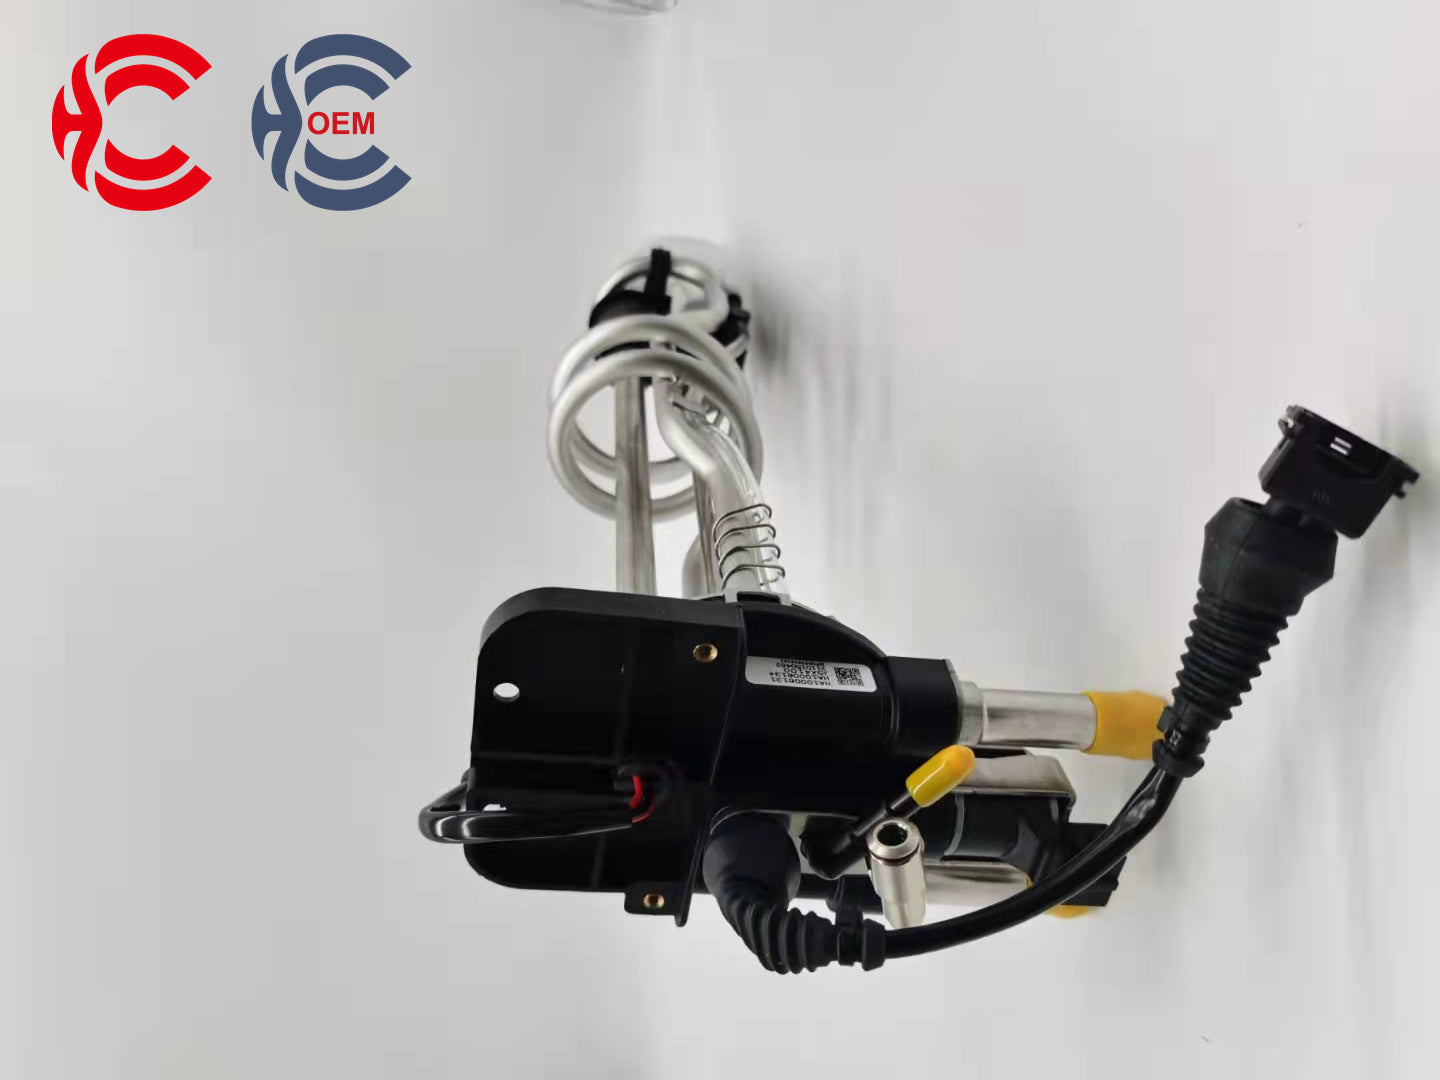 OEM: HA10006131 HA10006134 HENGHEMaterial: ABS metalColor: black silverOrigin: Made in ChinaWeight: 1000gPacking List: 1* Adblue Pump More ServiceWe can provide OEM Manufacturing serviceWe can Be your one-step solution for Auto PartsWe can provide technical scheme for you Feel Free to Contact Us, We will get back to you as soon as possible.